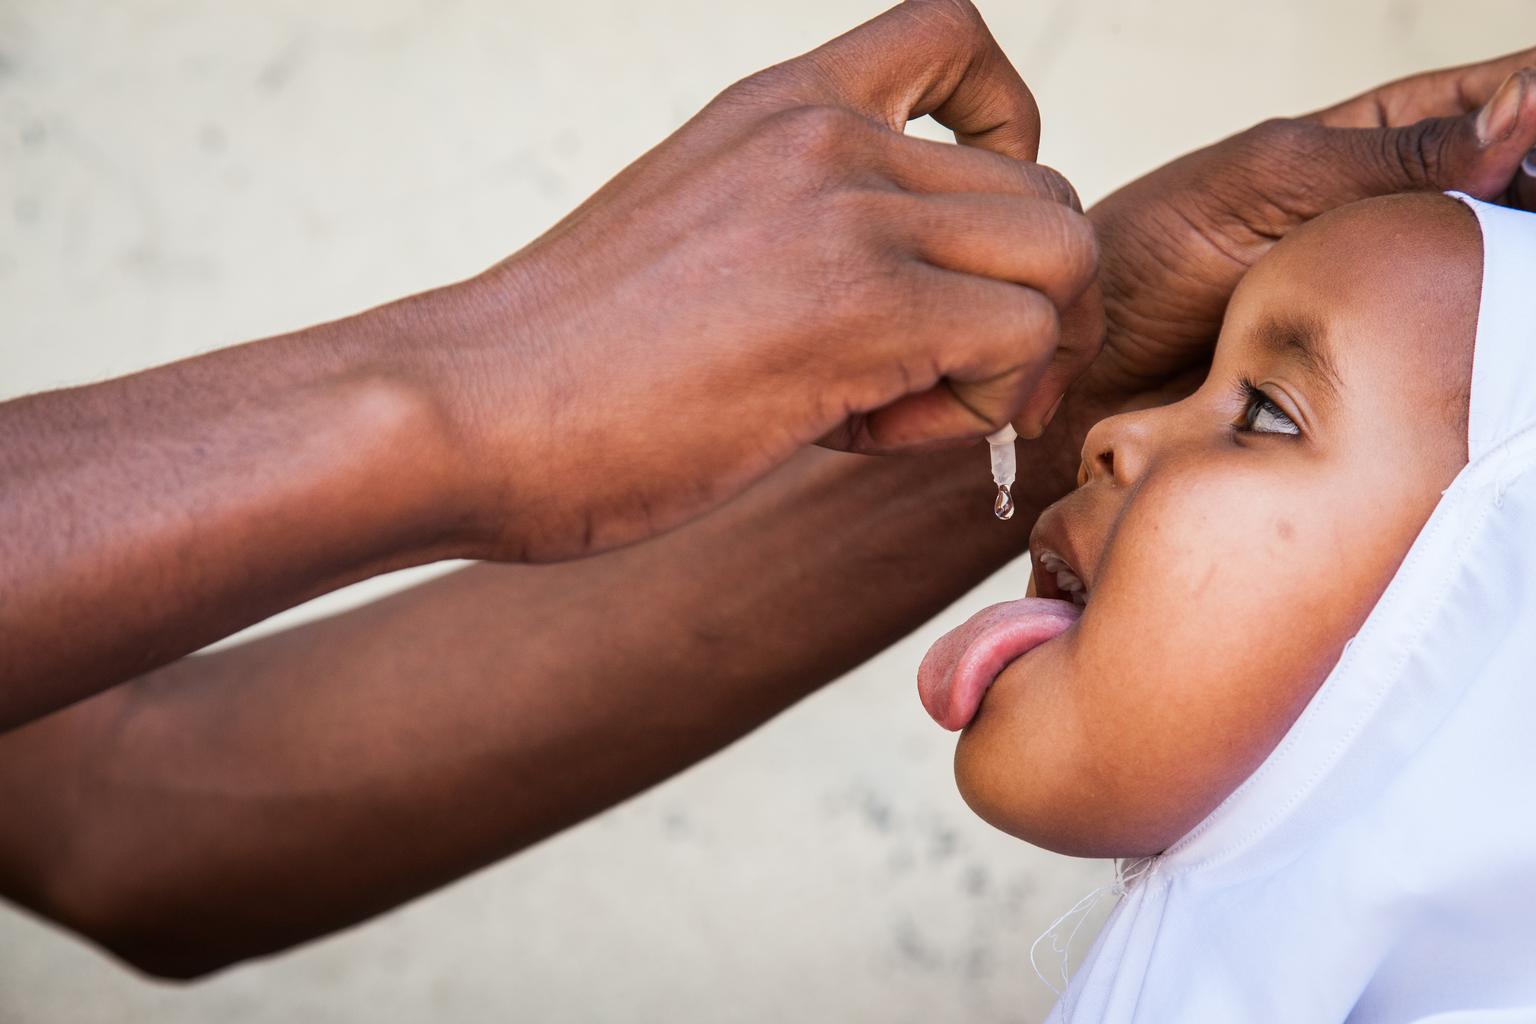 A little girl from Somalia receives a dose of oral polio vaccine during an emergency immunization campaign UNICEF and partners waged in 2013 after Somalia experienced its first rash of cases since 2007.  Image: UNI155431 Credit: © UNICEF/NYHQ2013-1317/Oha